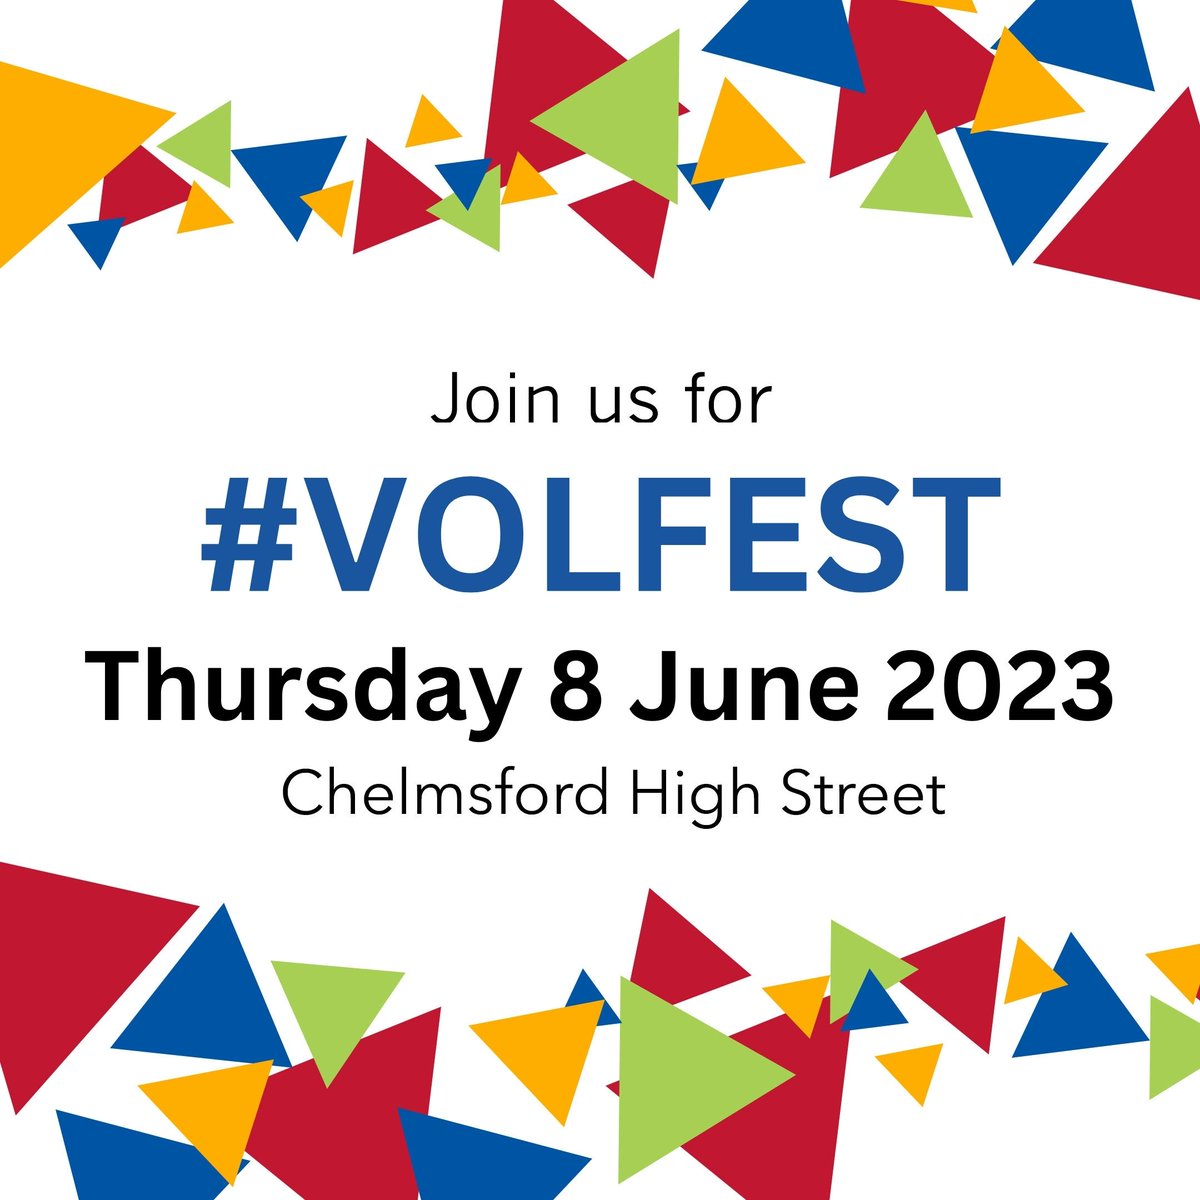 #VolFest is back!
On Thursday 8 June, we will be celebrating #NationalVolunteersWeek by taking over Chelmsford High Street.
34 local organisations will be showcasing their efforts & services in a festival of all the good that can come of our community working together! ❤️💛💙💚